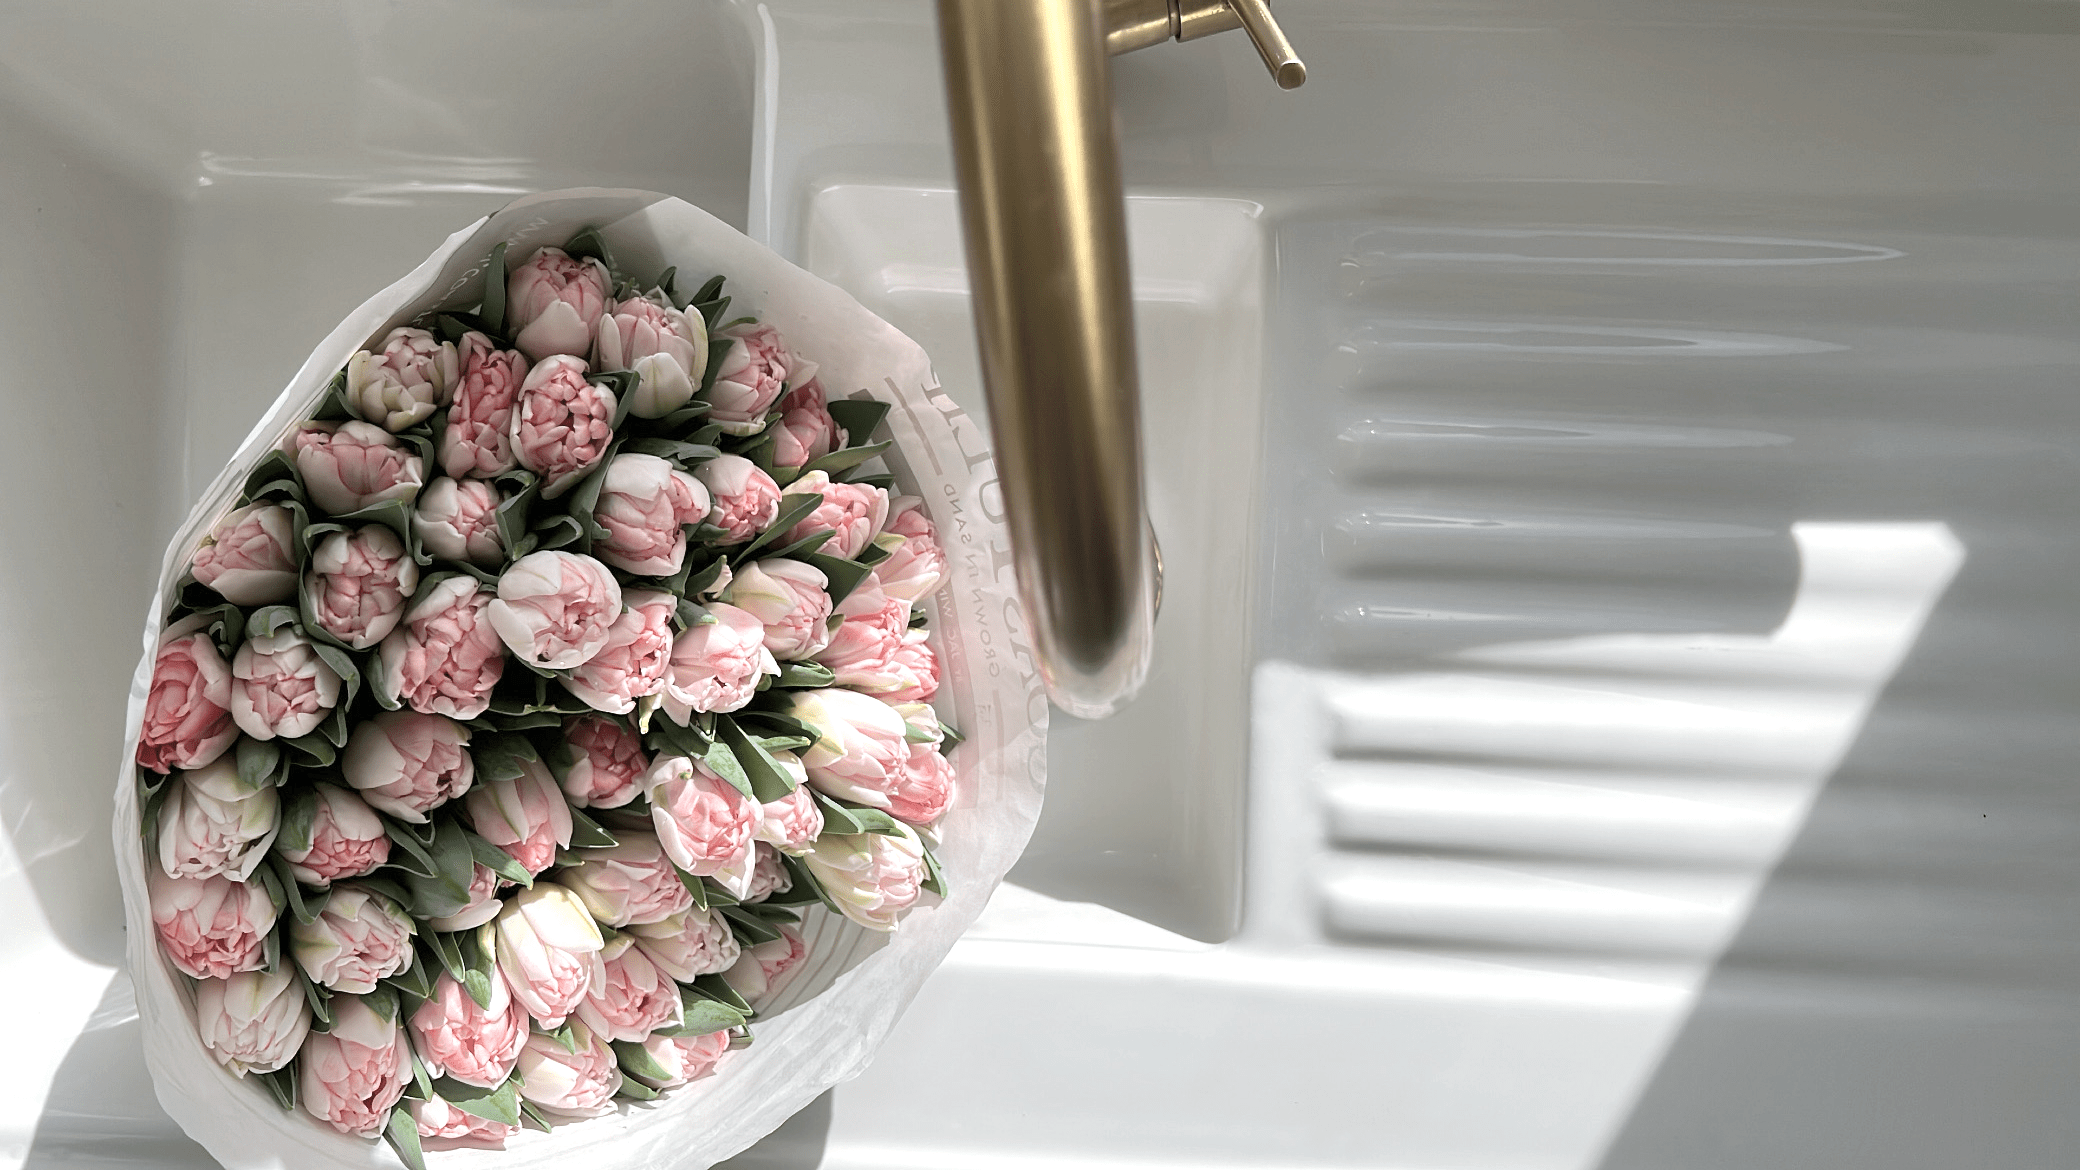 Letterbox Flowers Delivery | Letter box Flowers | FlowerFix Flower Delivery